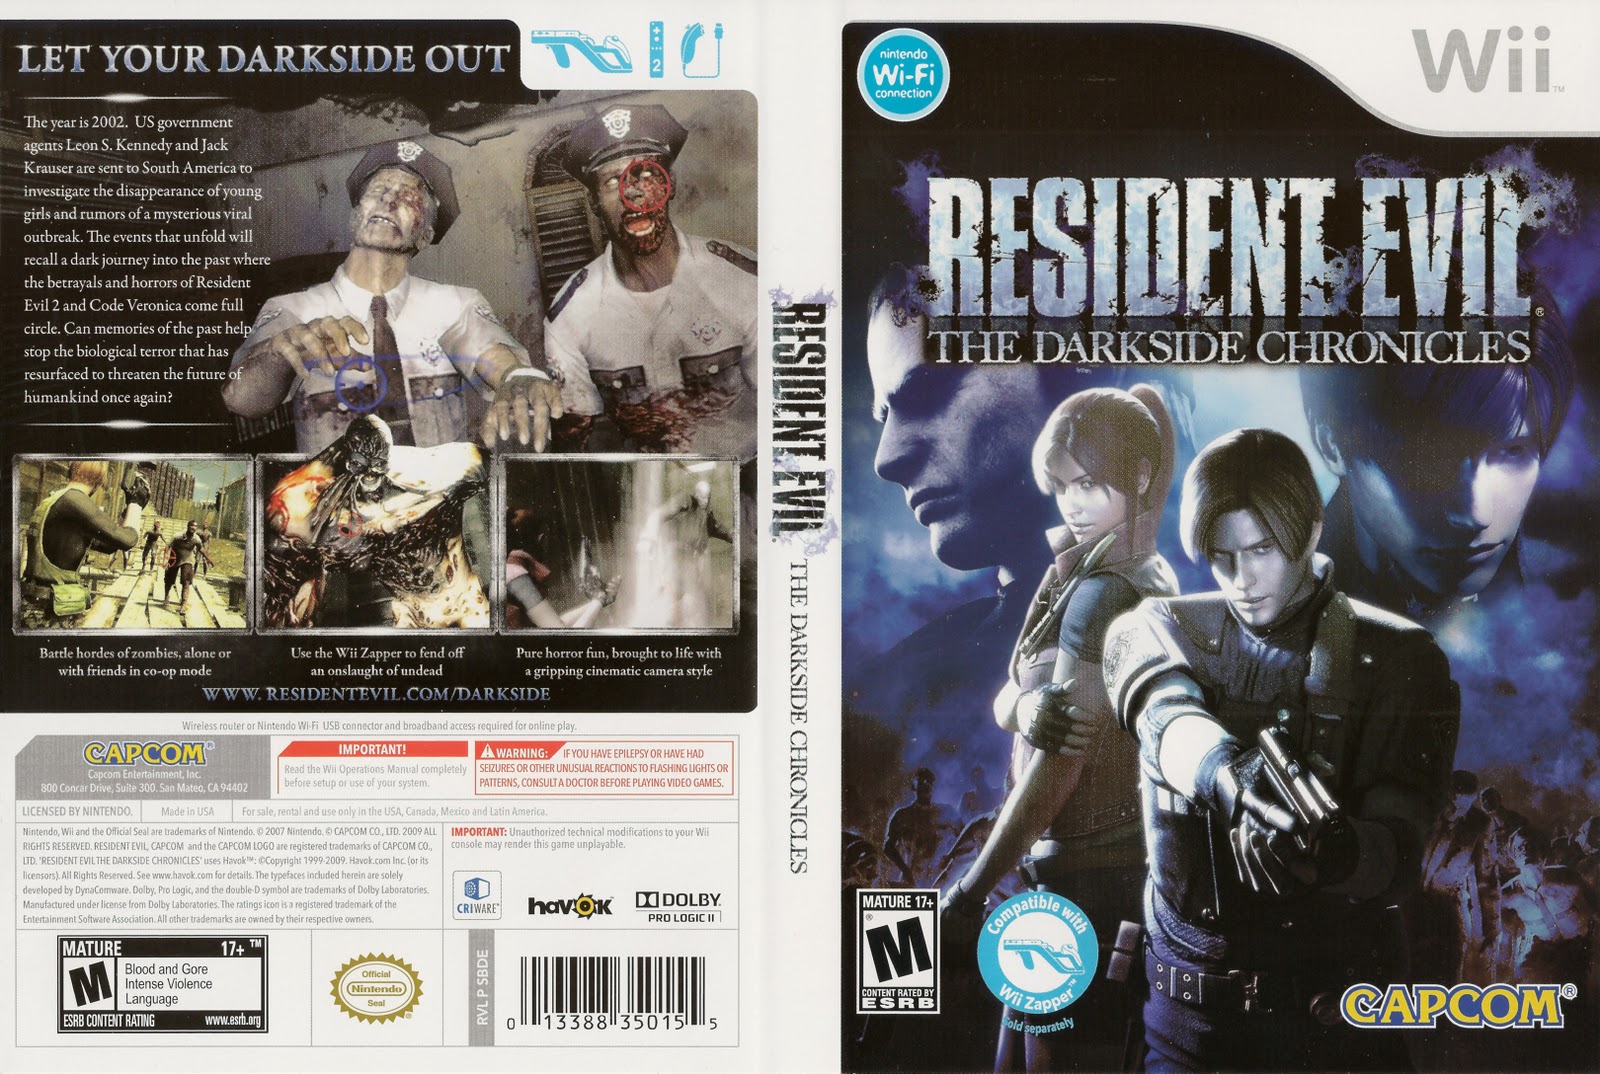 resident evil darkside chronicles pc requirements